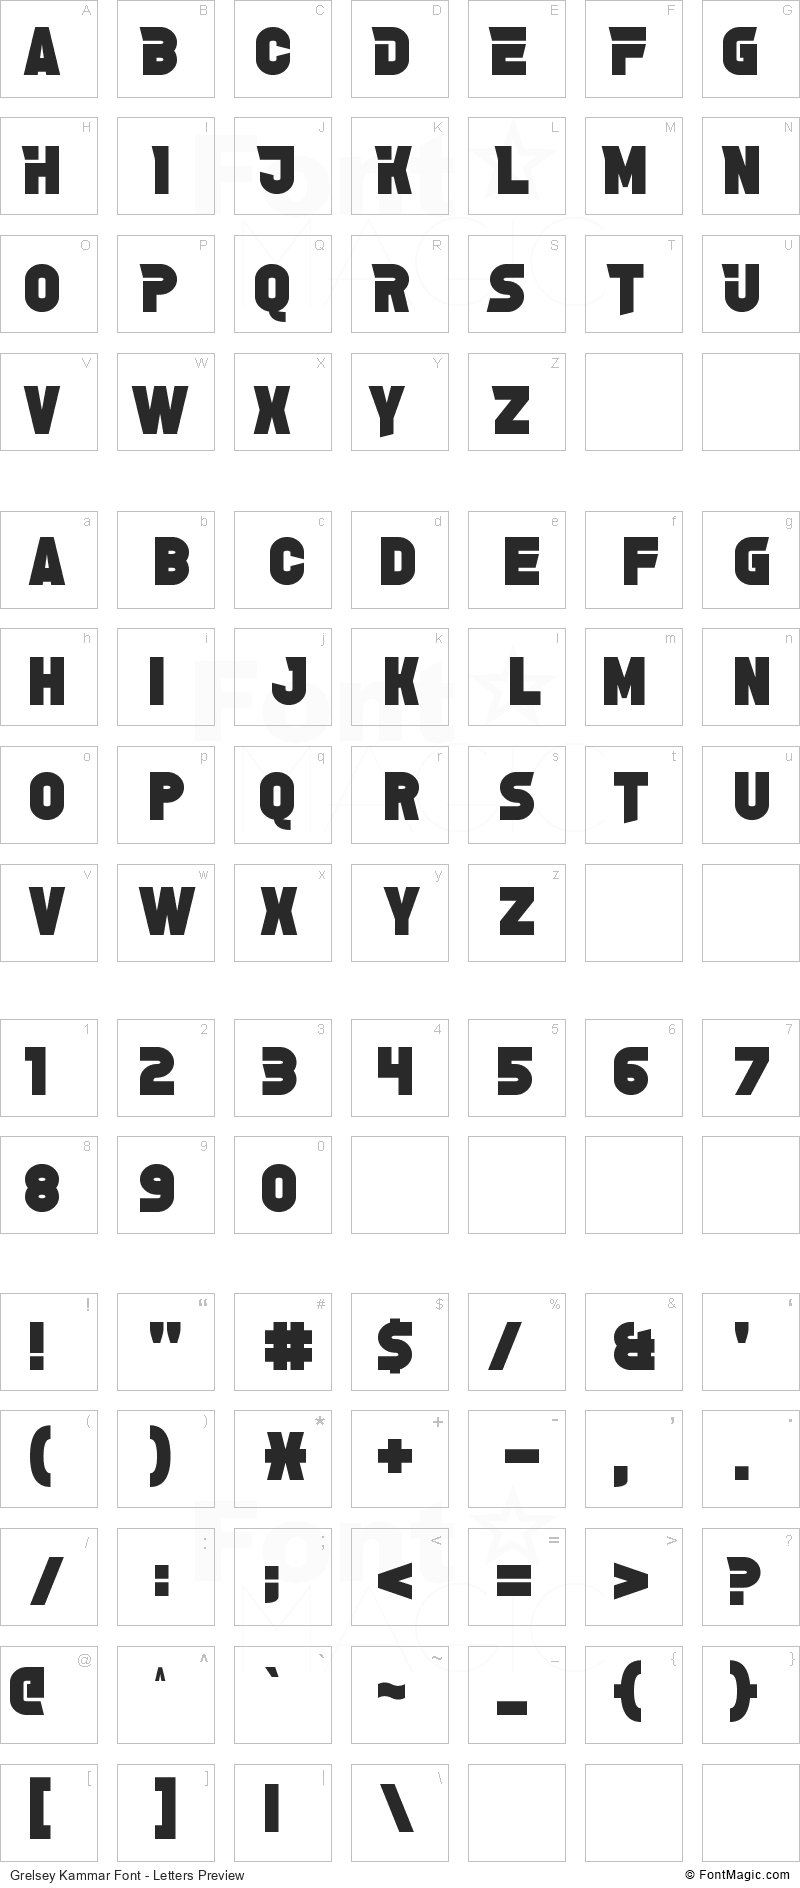 Grelsey Kammar Font - All Latters Preview Chart